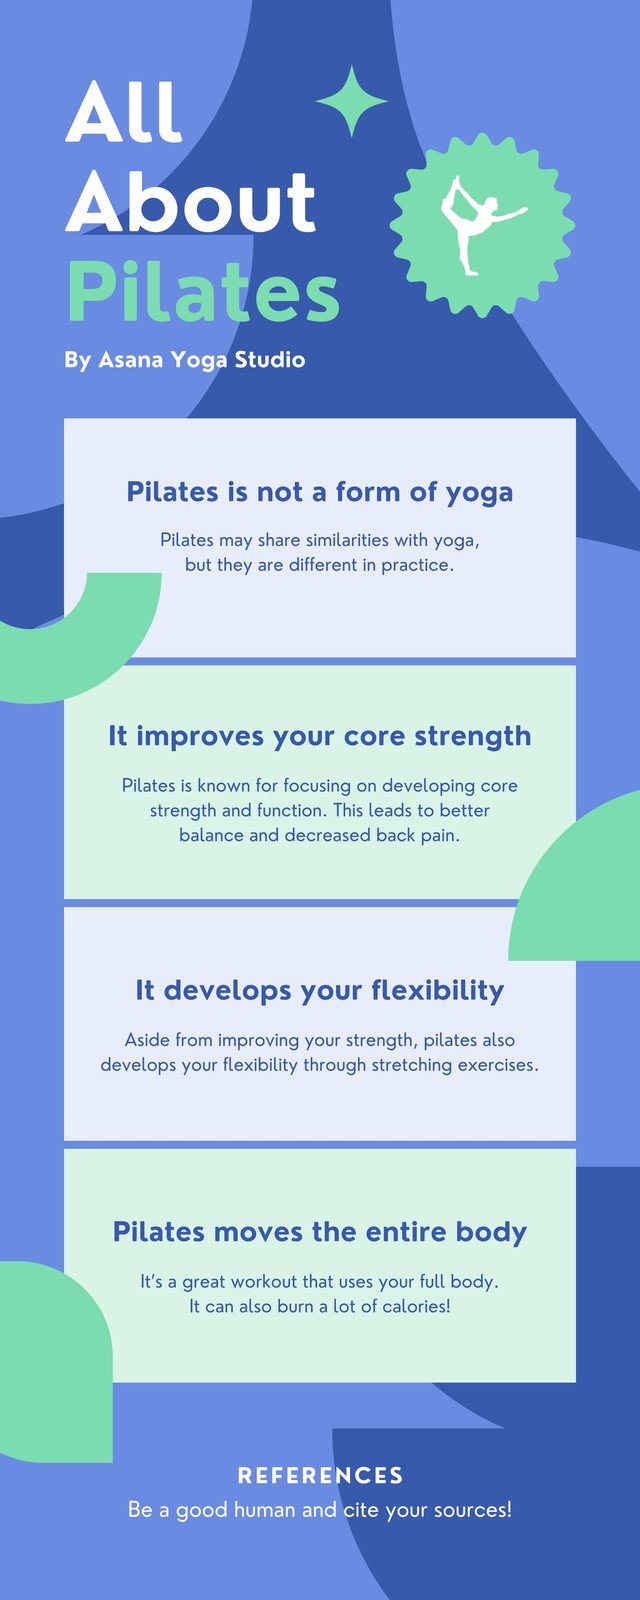 All about Pilates